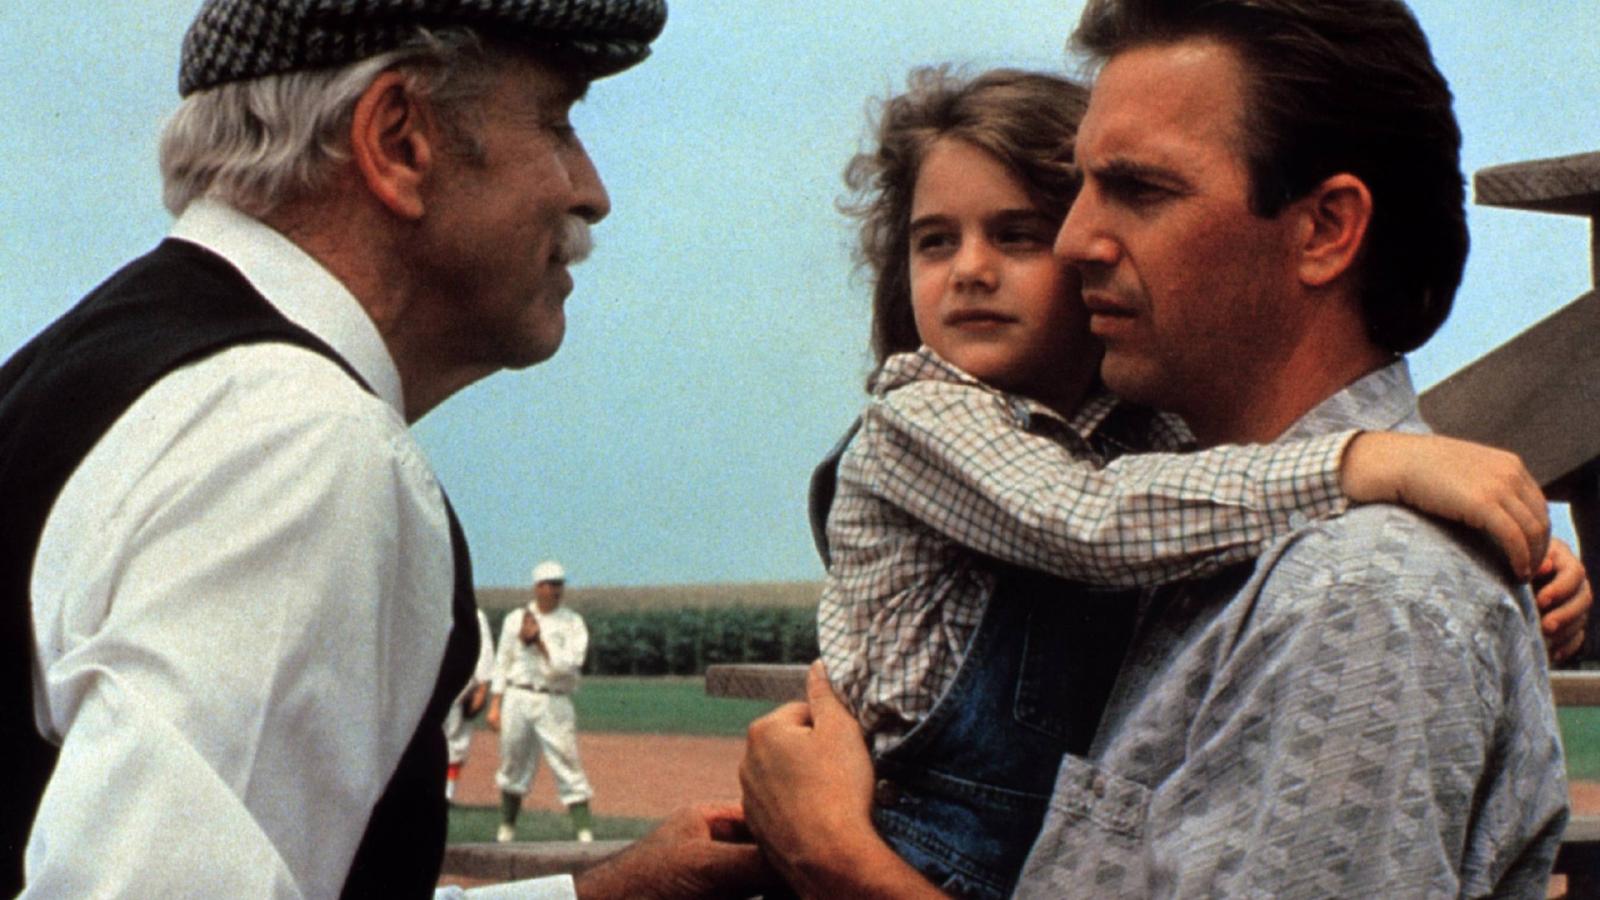 10 Sports Movies That Scored Big on and Off the Field - image 3